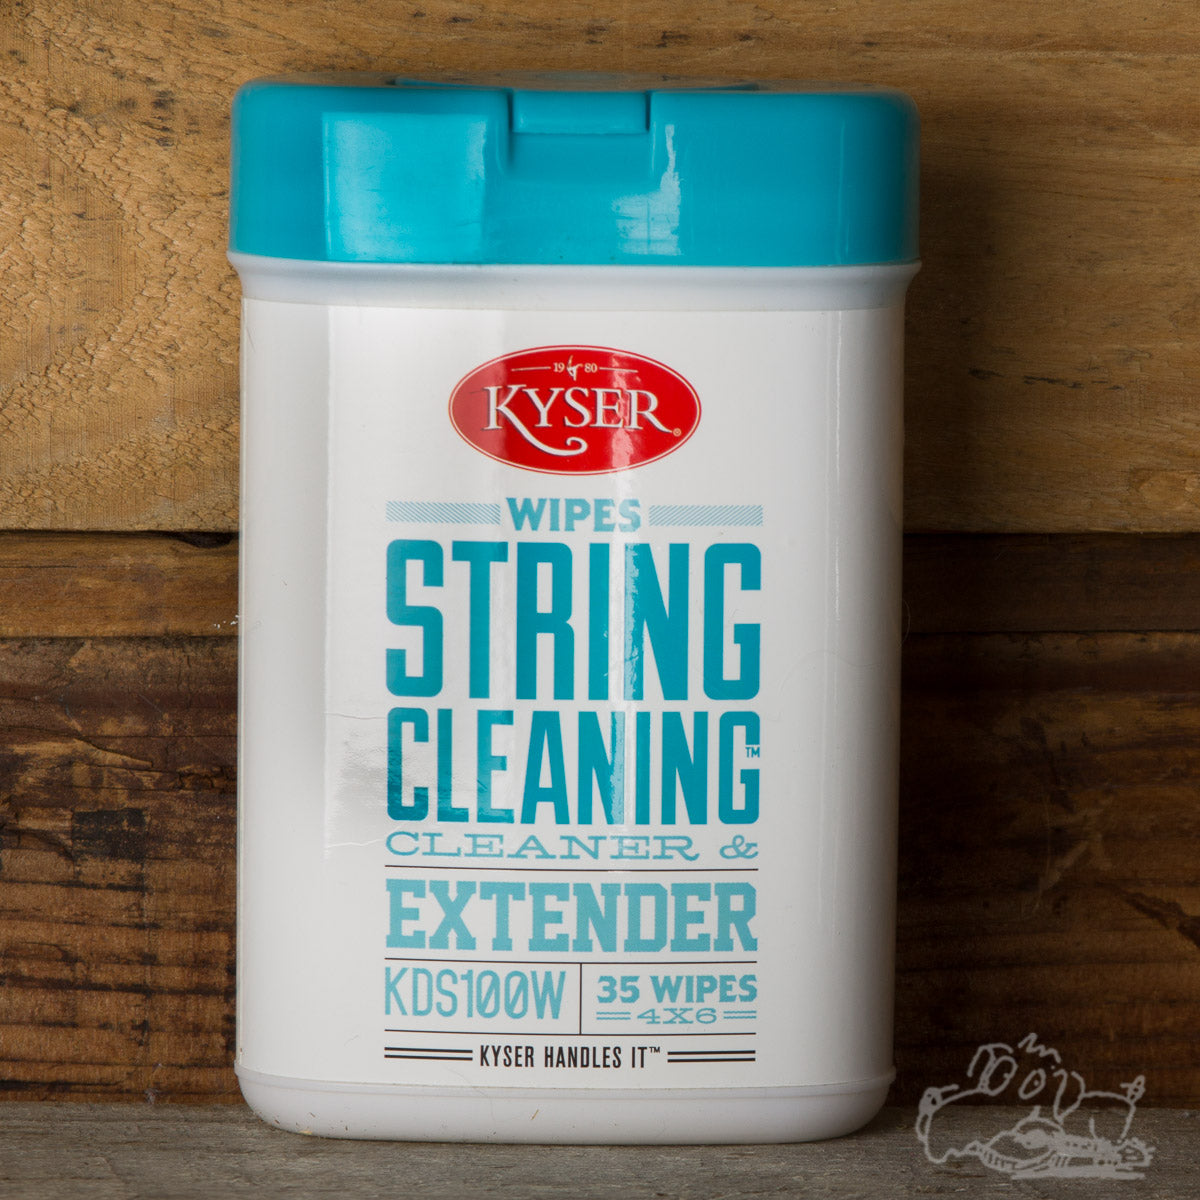 Kyser Wipes String Cleaner & Extender - 4x6 Wipes (35 Wipes)